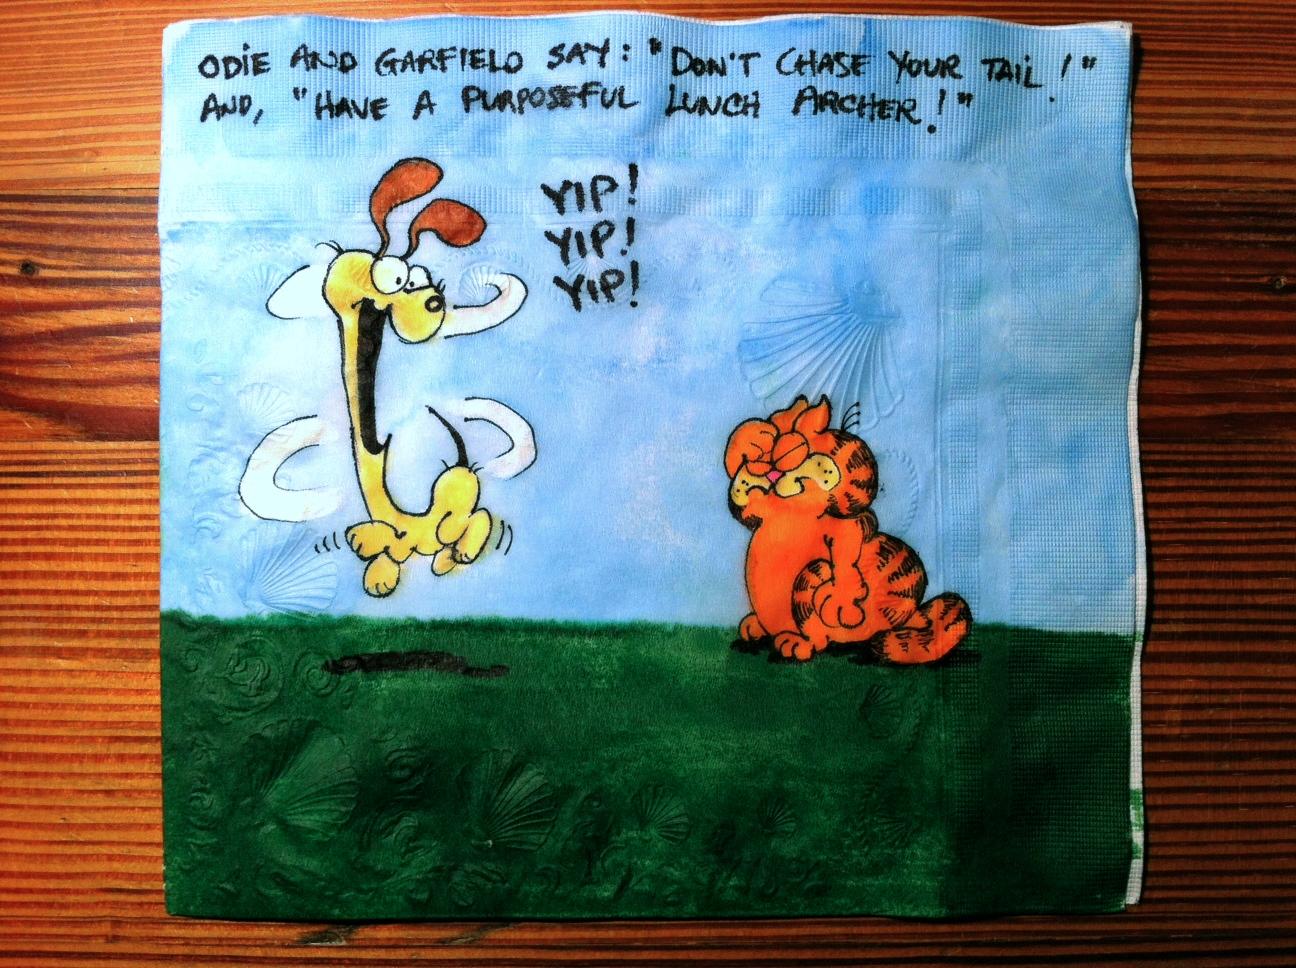 cartoon - Odie And Garfielo Say! Don'T Chase Your Tay And, "Aave A Purposeful Lunch Archer ?" Yp! Yip! Yip!